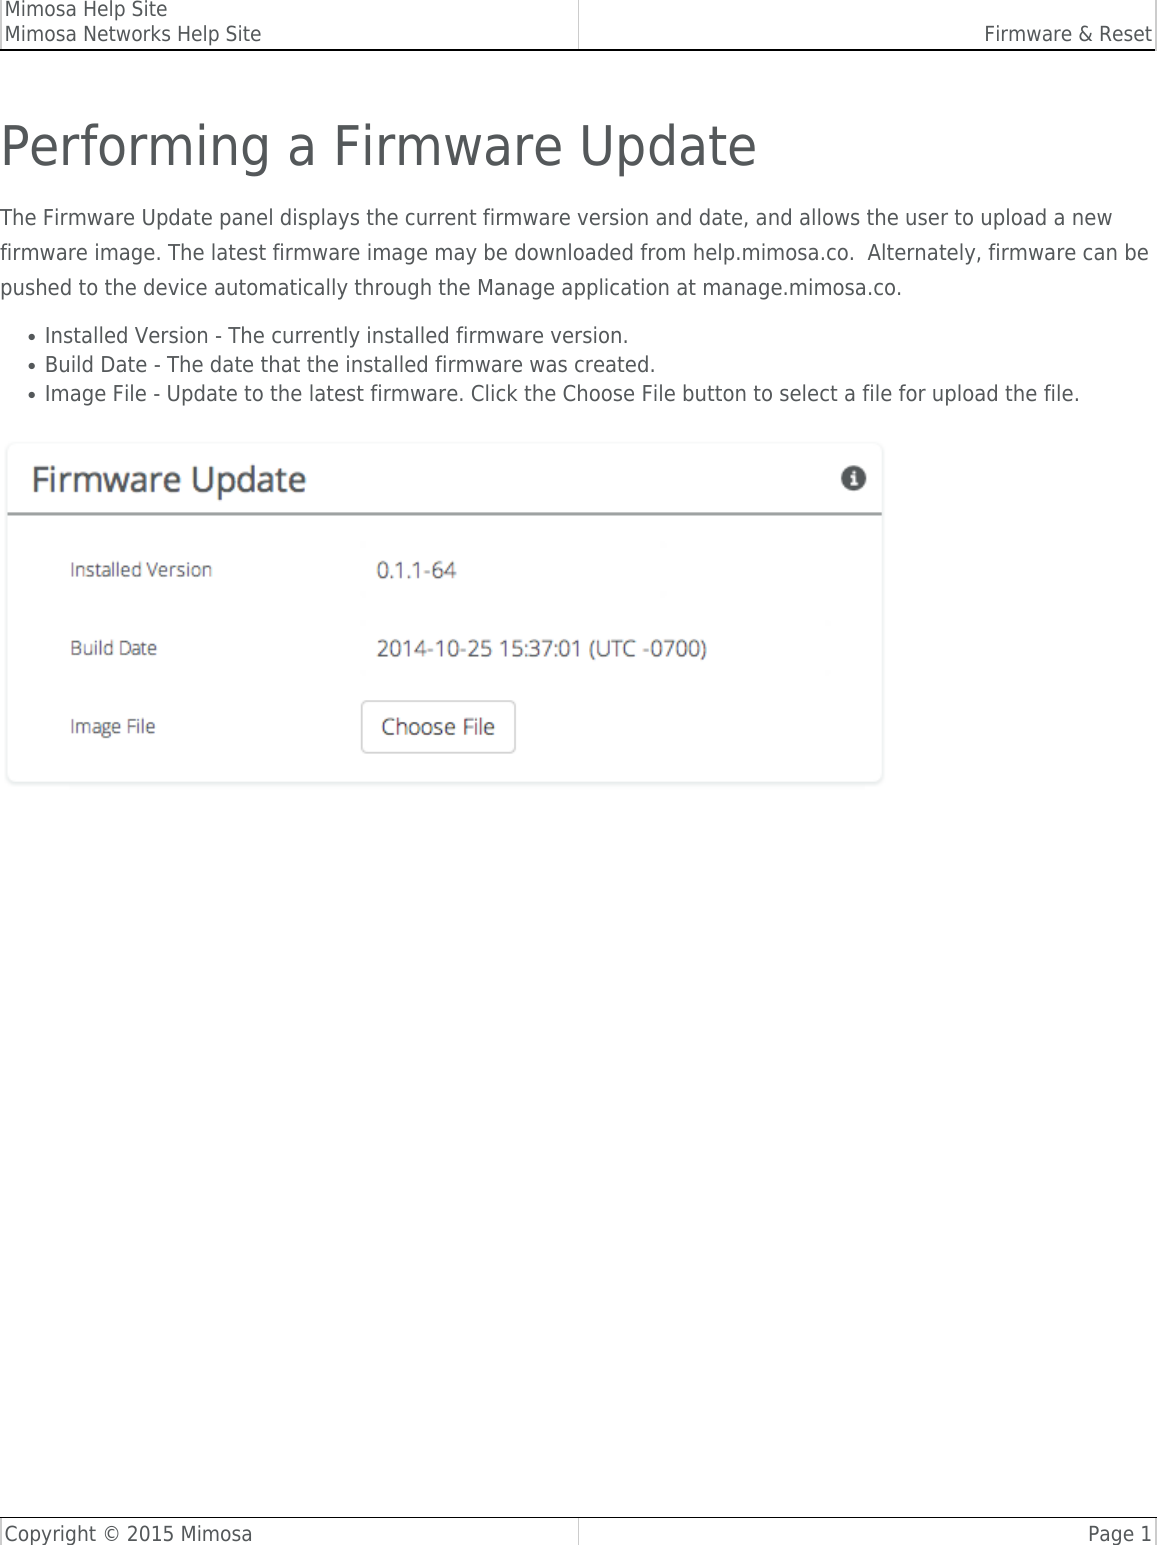 Mimosa Help SiteMimosa Networks Help Site Firmware &amp; ResetCopyright © 2015 Mimosa Page 1Performing a Firmware UpdateThe Firmware Update panel displays the current firmware version and date, and allows the user to upload a newfirmware image. The latest firmware image may be downloaded from help.mimosa.co.  Alternately, firmware can bepushed to the device automatically through the Manage application at manage.mimosa.co.Installed Version - The currently installed firmware version.●Build Date - The date that the installed firmware was created.●Image File - Update to the latest firmware. Click the Choose File button to select a file for upload the file.●